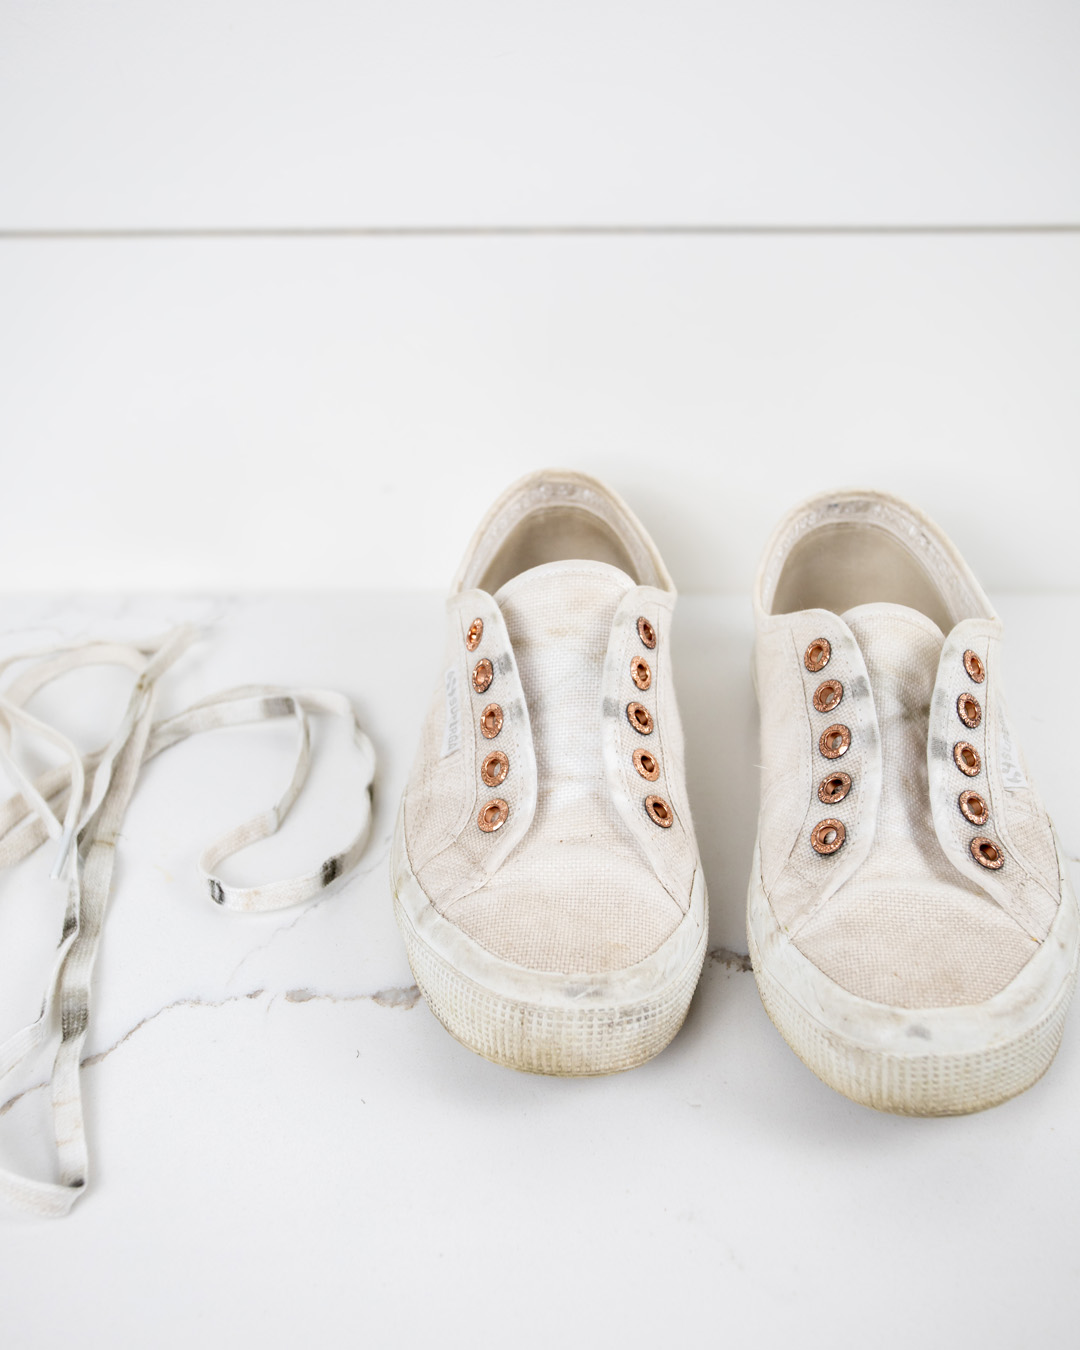 In today's post we'll talk about the most effective way to clean white canvas sneakers and get them back to almost as good as new!